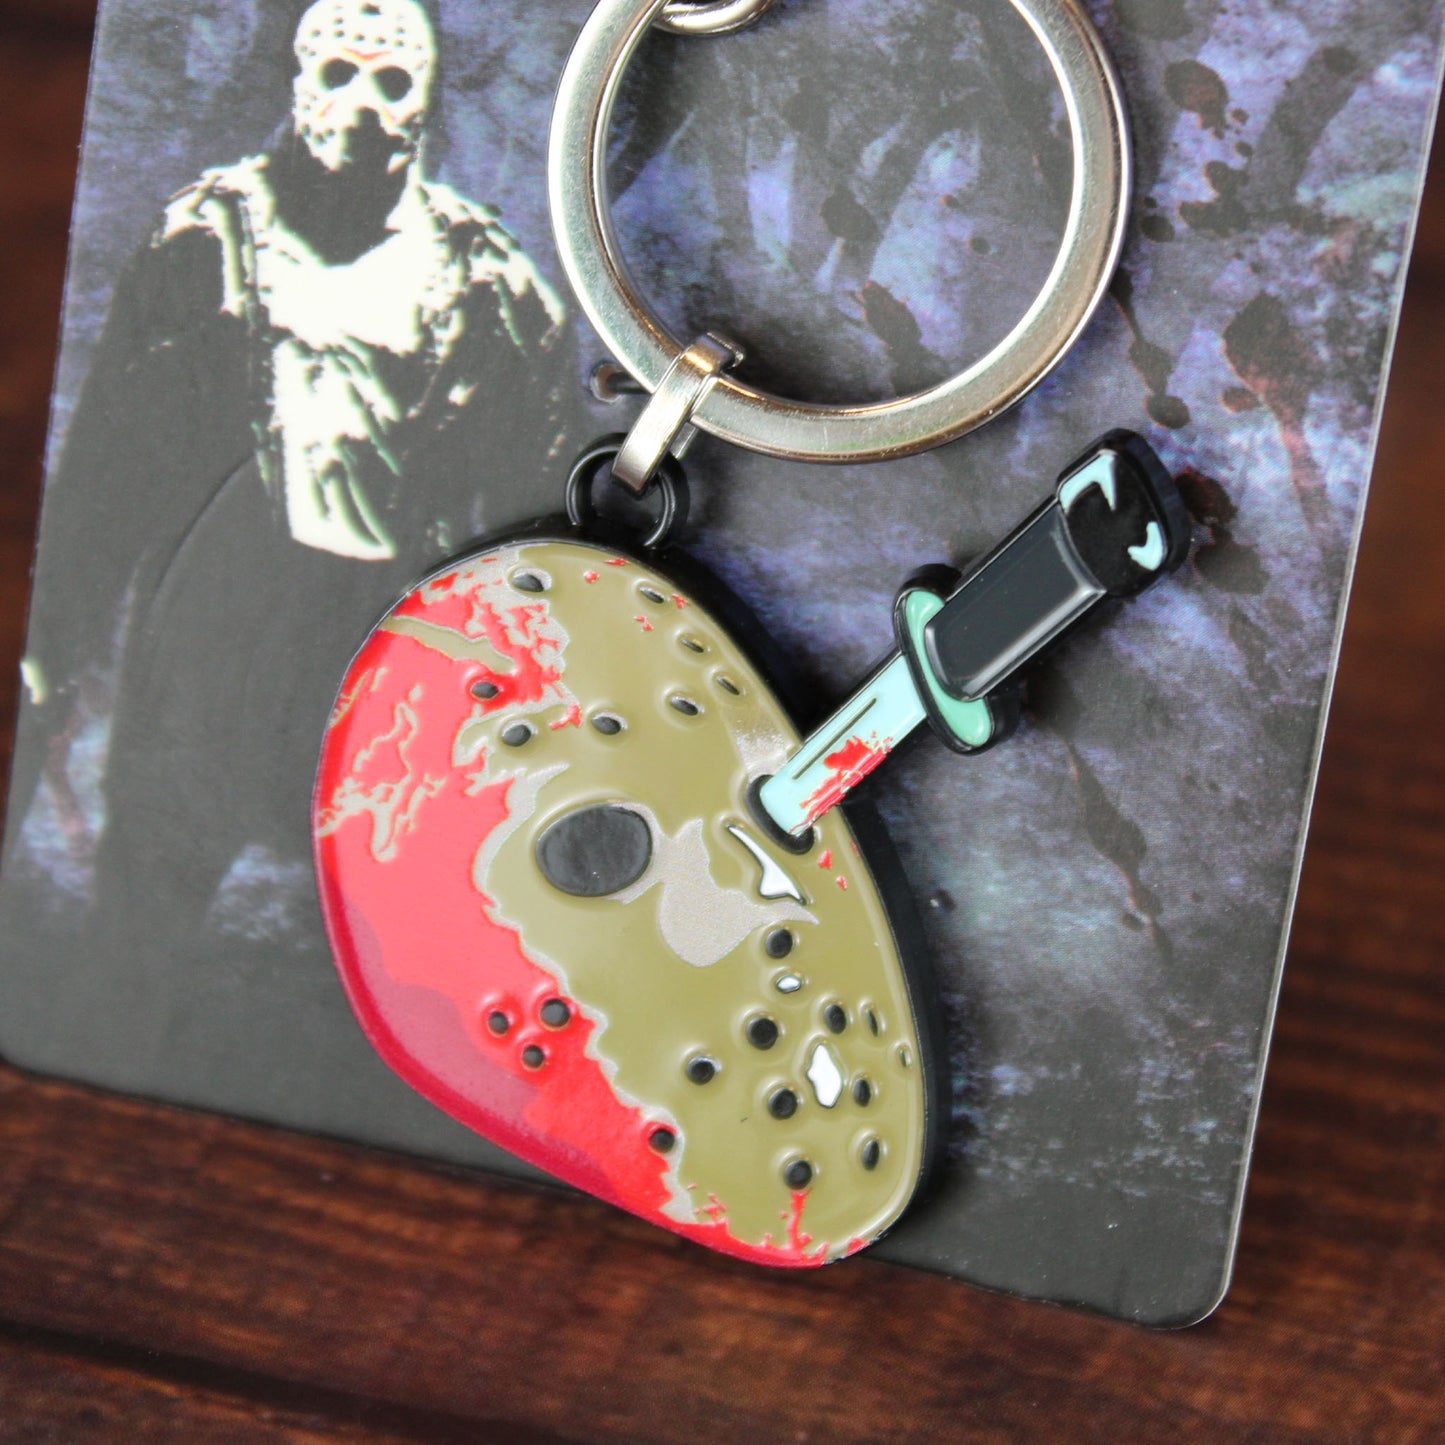 Jason Voorhees Knife in Mask (Friday the 13th) Enamel Keychain